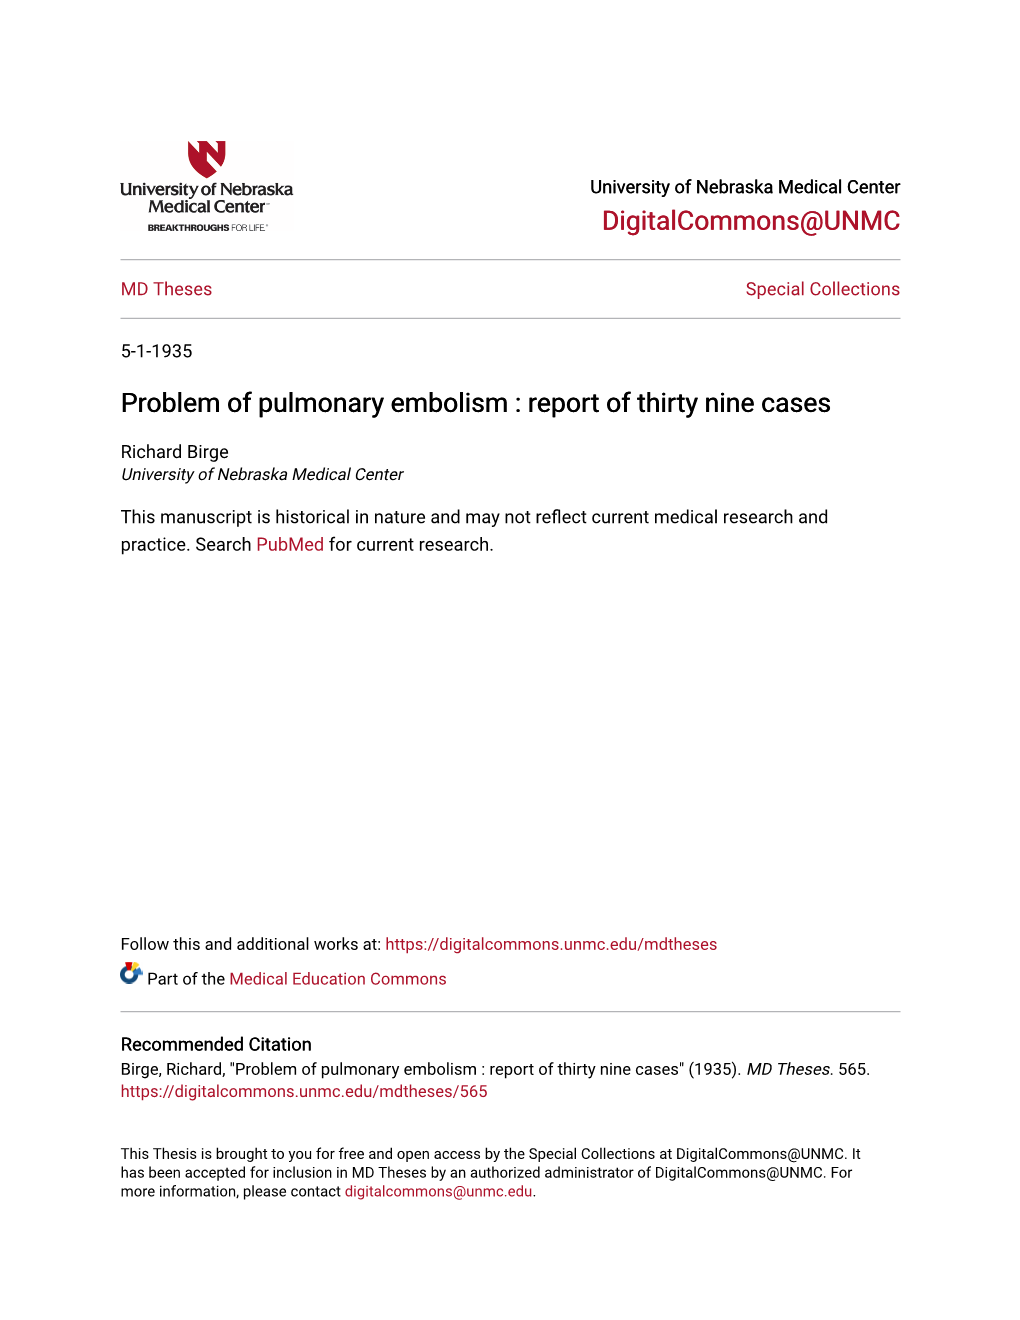 Problem of Pulmonary Embolism : Report of Thirty Nine Cases